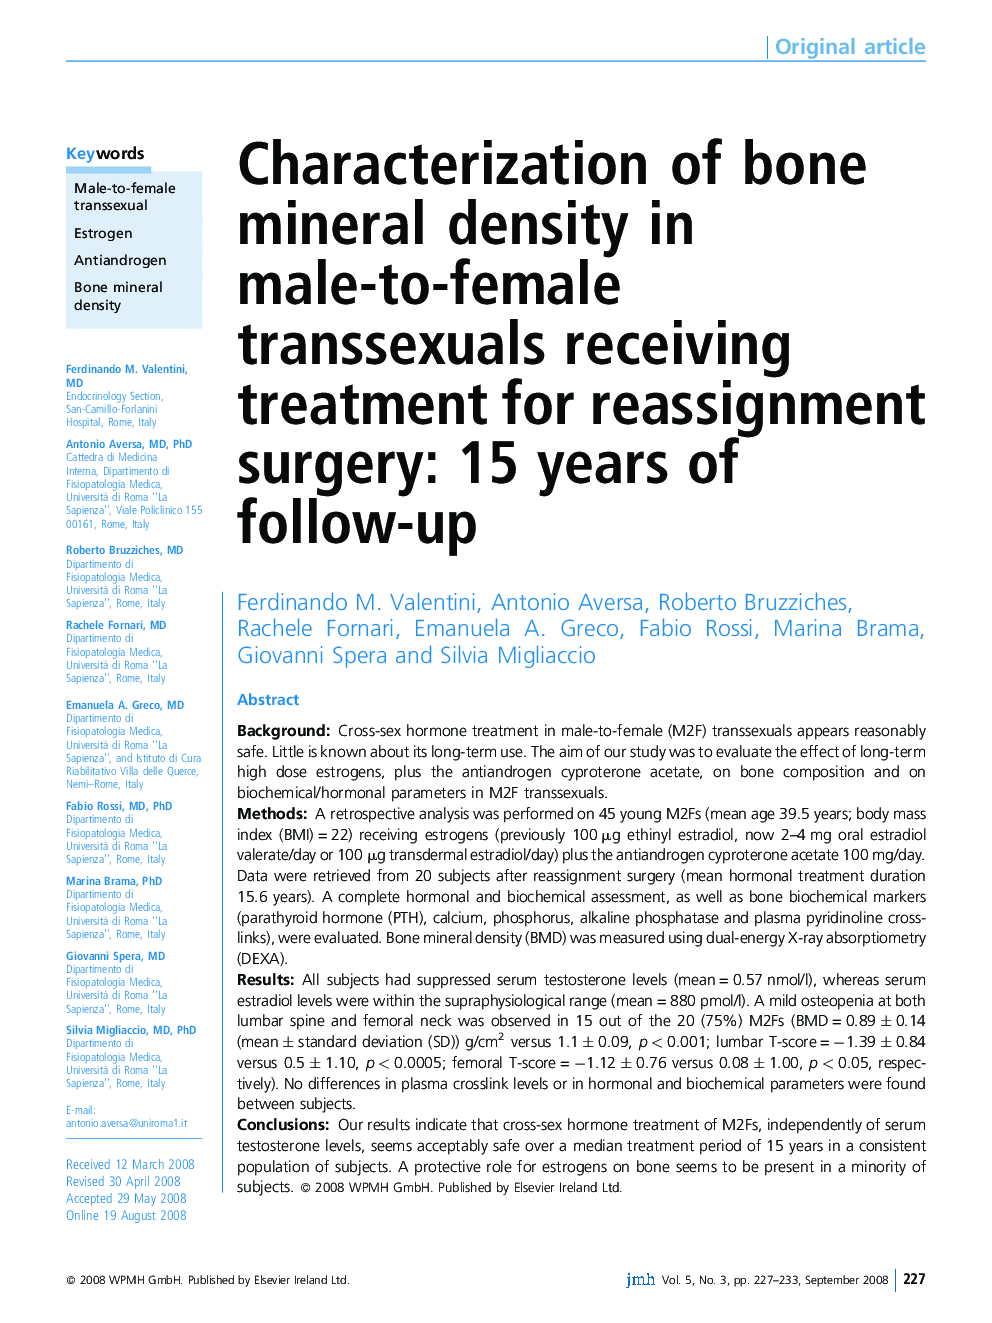 Characterization of bone mineral density in male-to-female transsexuals receiving treatment for reassignment surgery: 15 years of follow-up